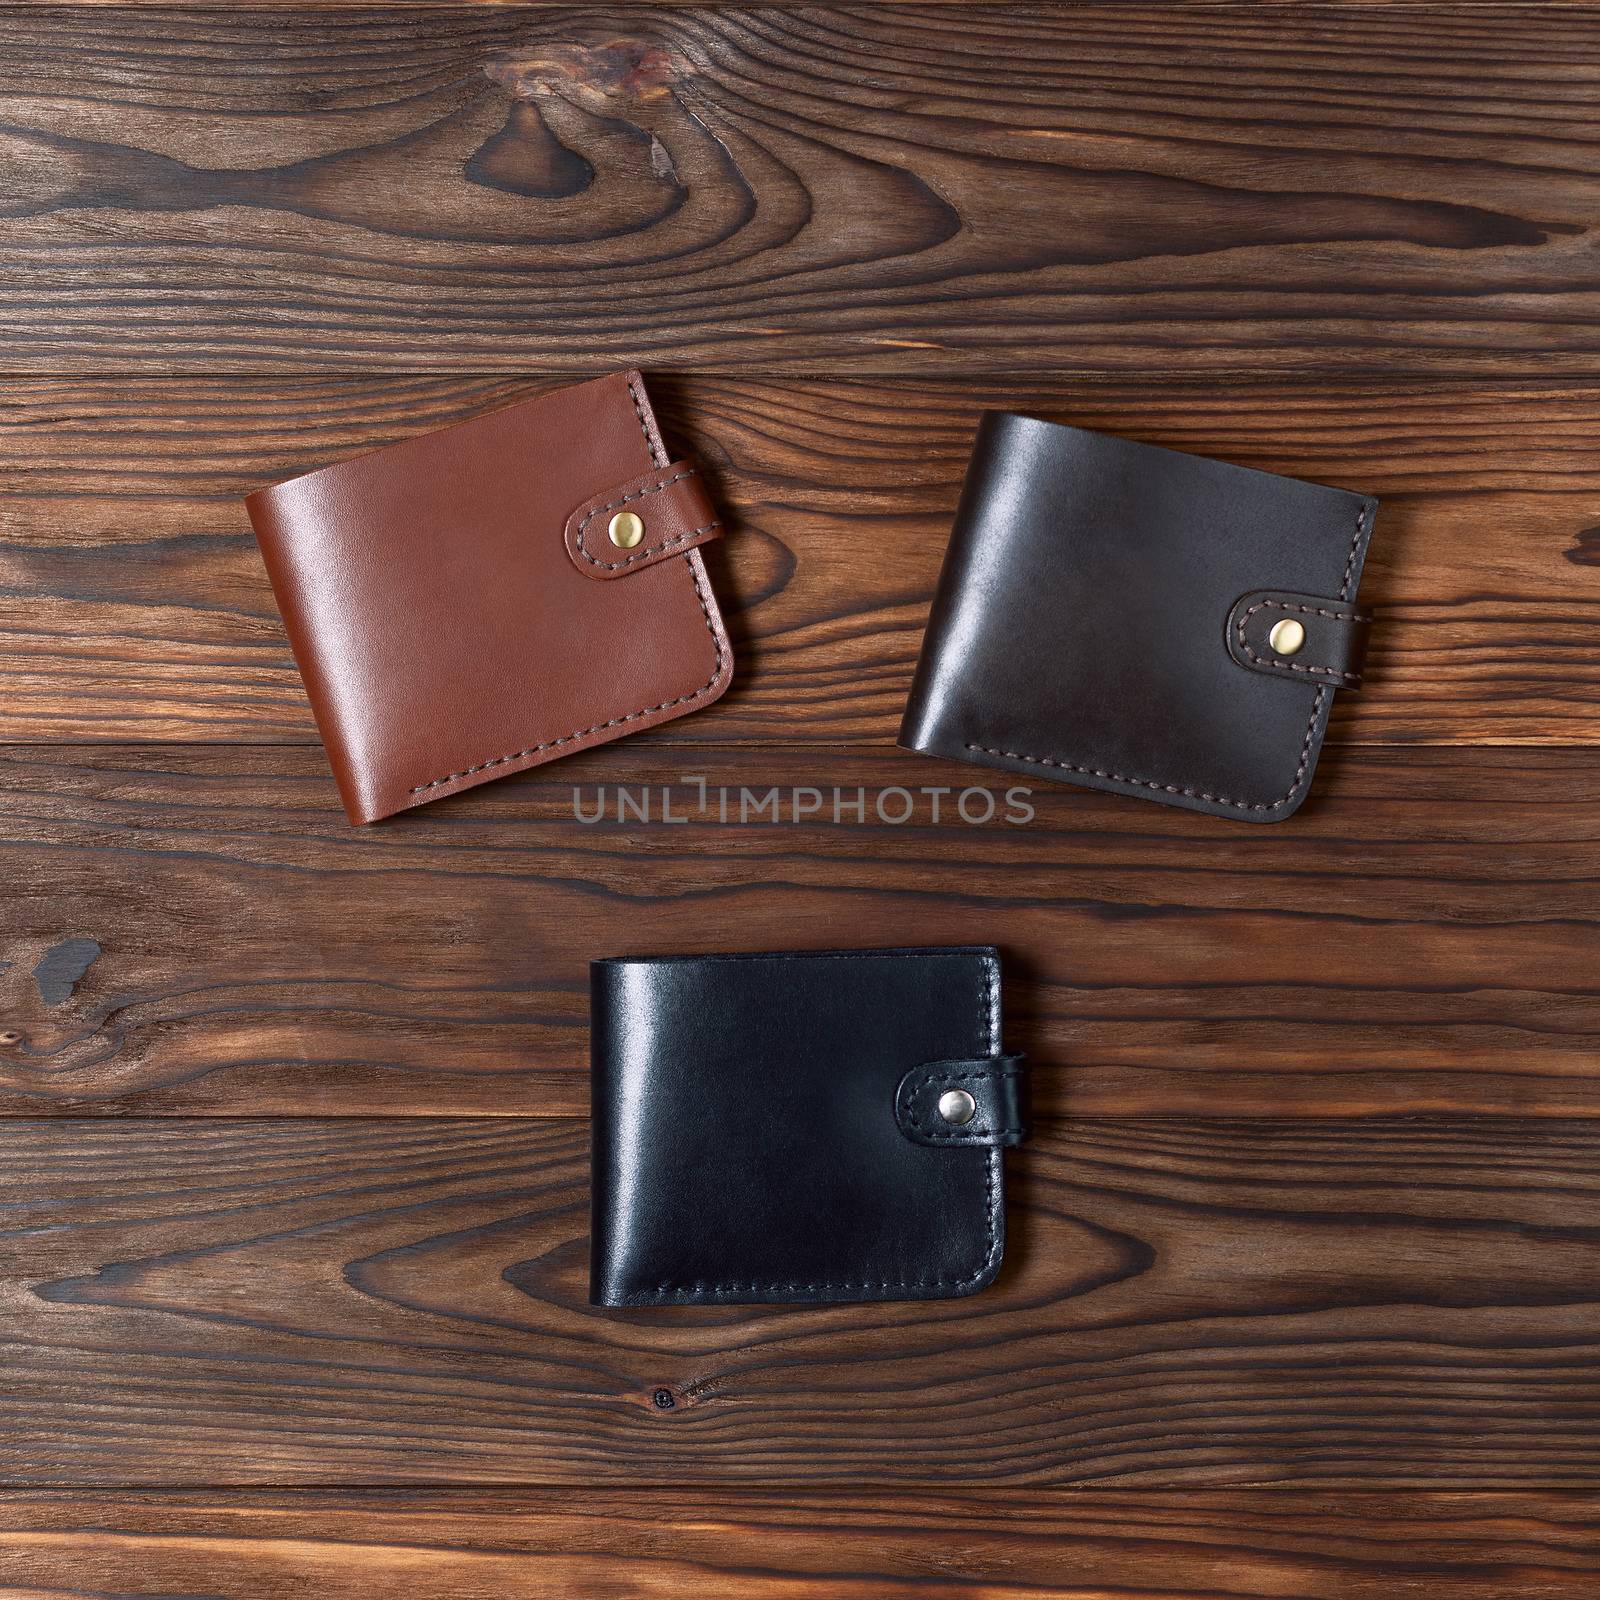 Three handmade leather gloss wallets on wooden textured background. Up to down view. Businessman wallet stock photo.